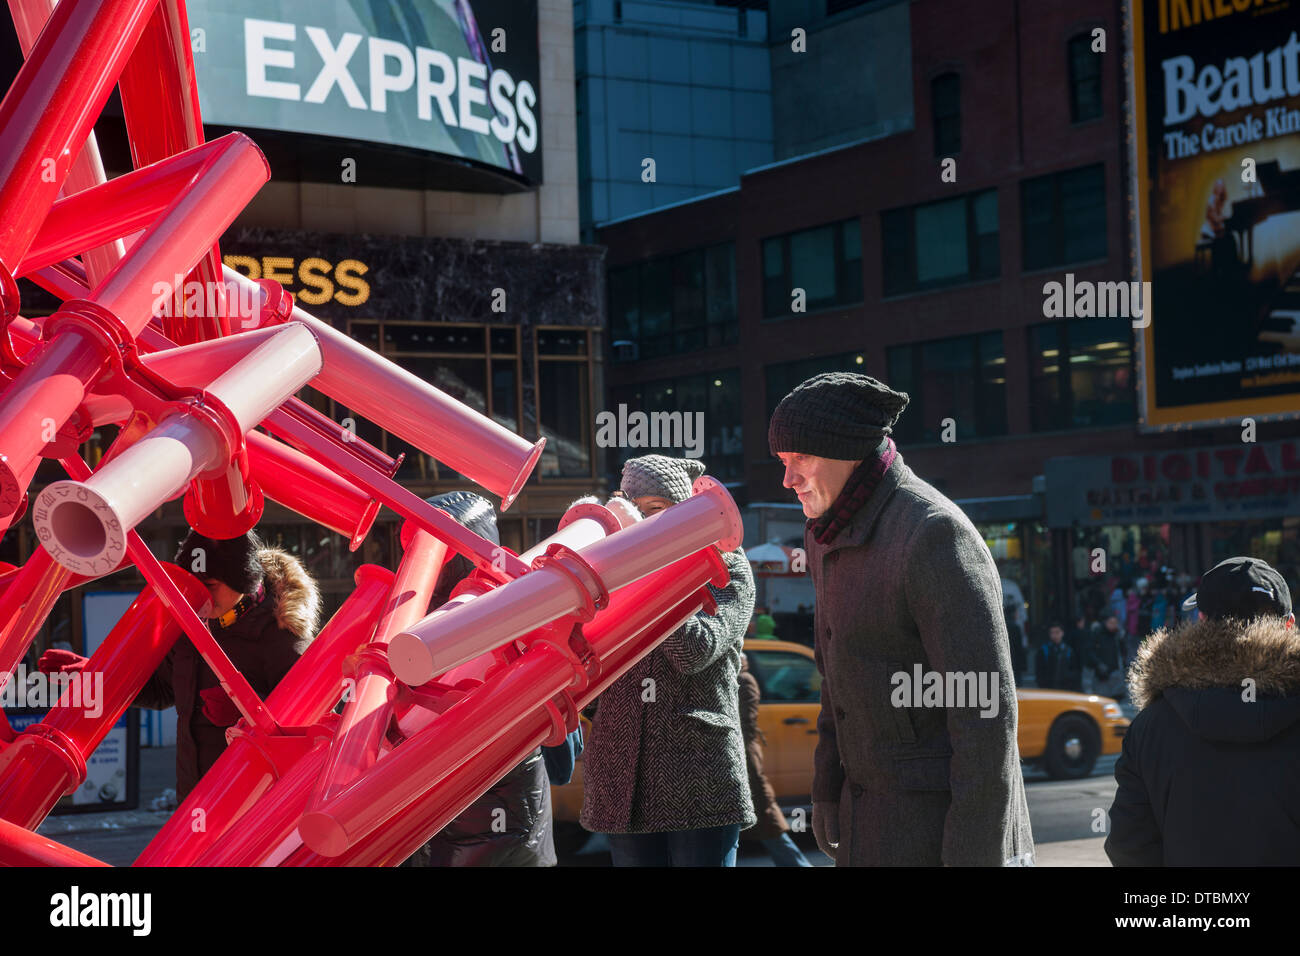 Viewers peer through the periscopes of 'Match-Maker', created by the design studio Young Projects, in Times Square in New York Stock Photo